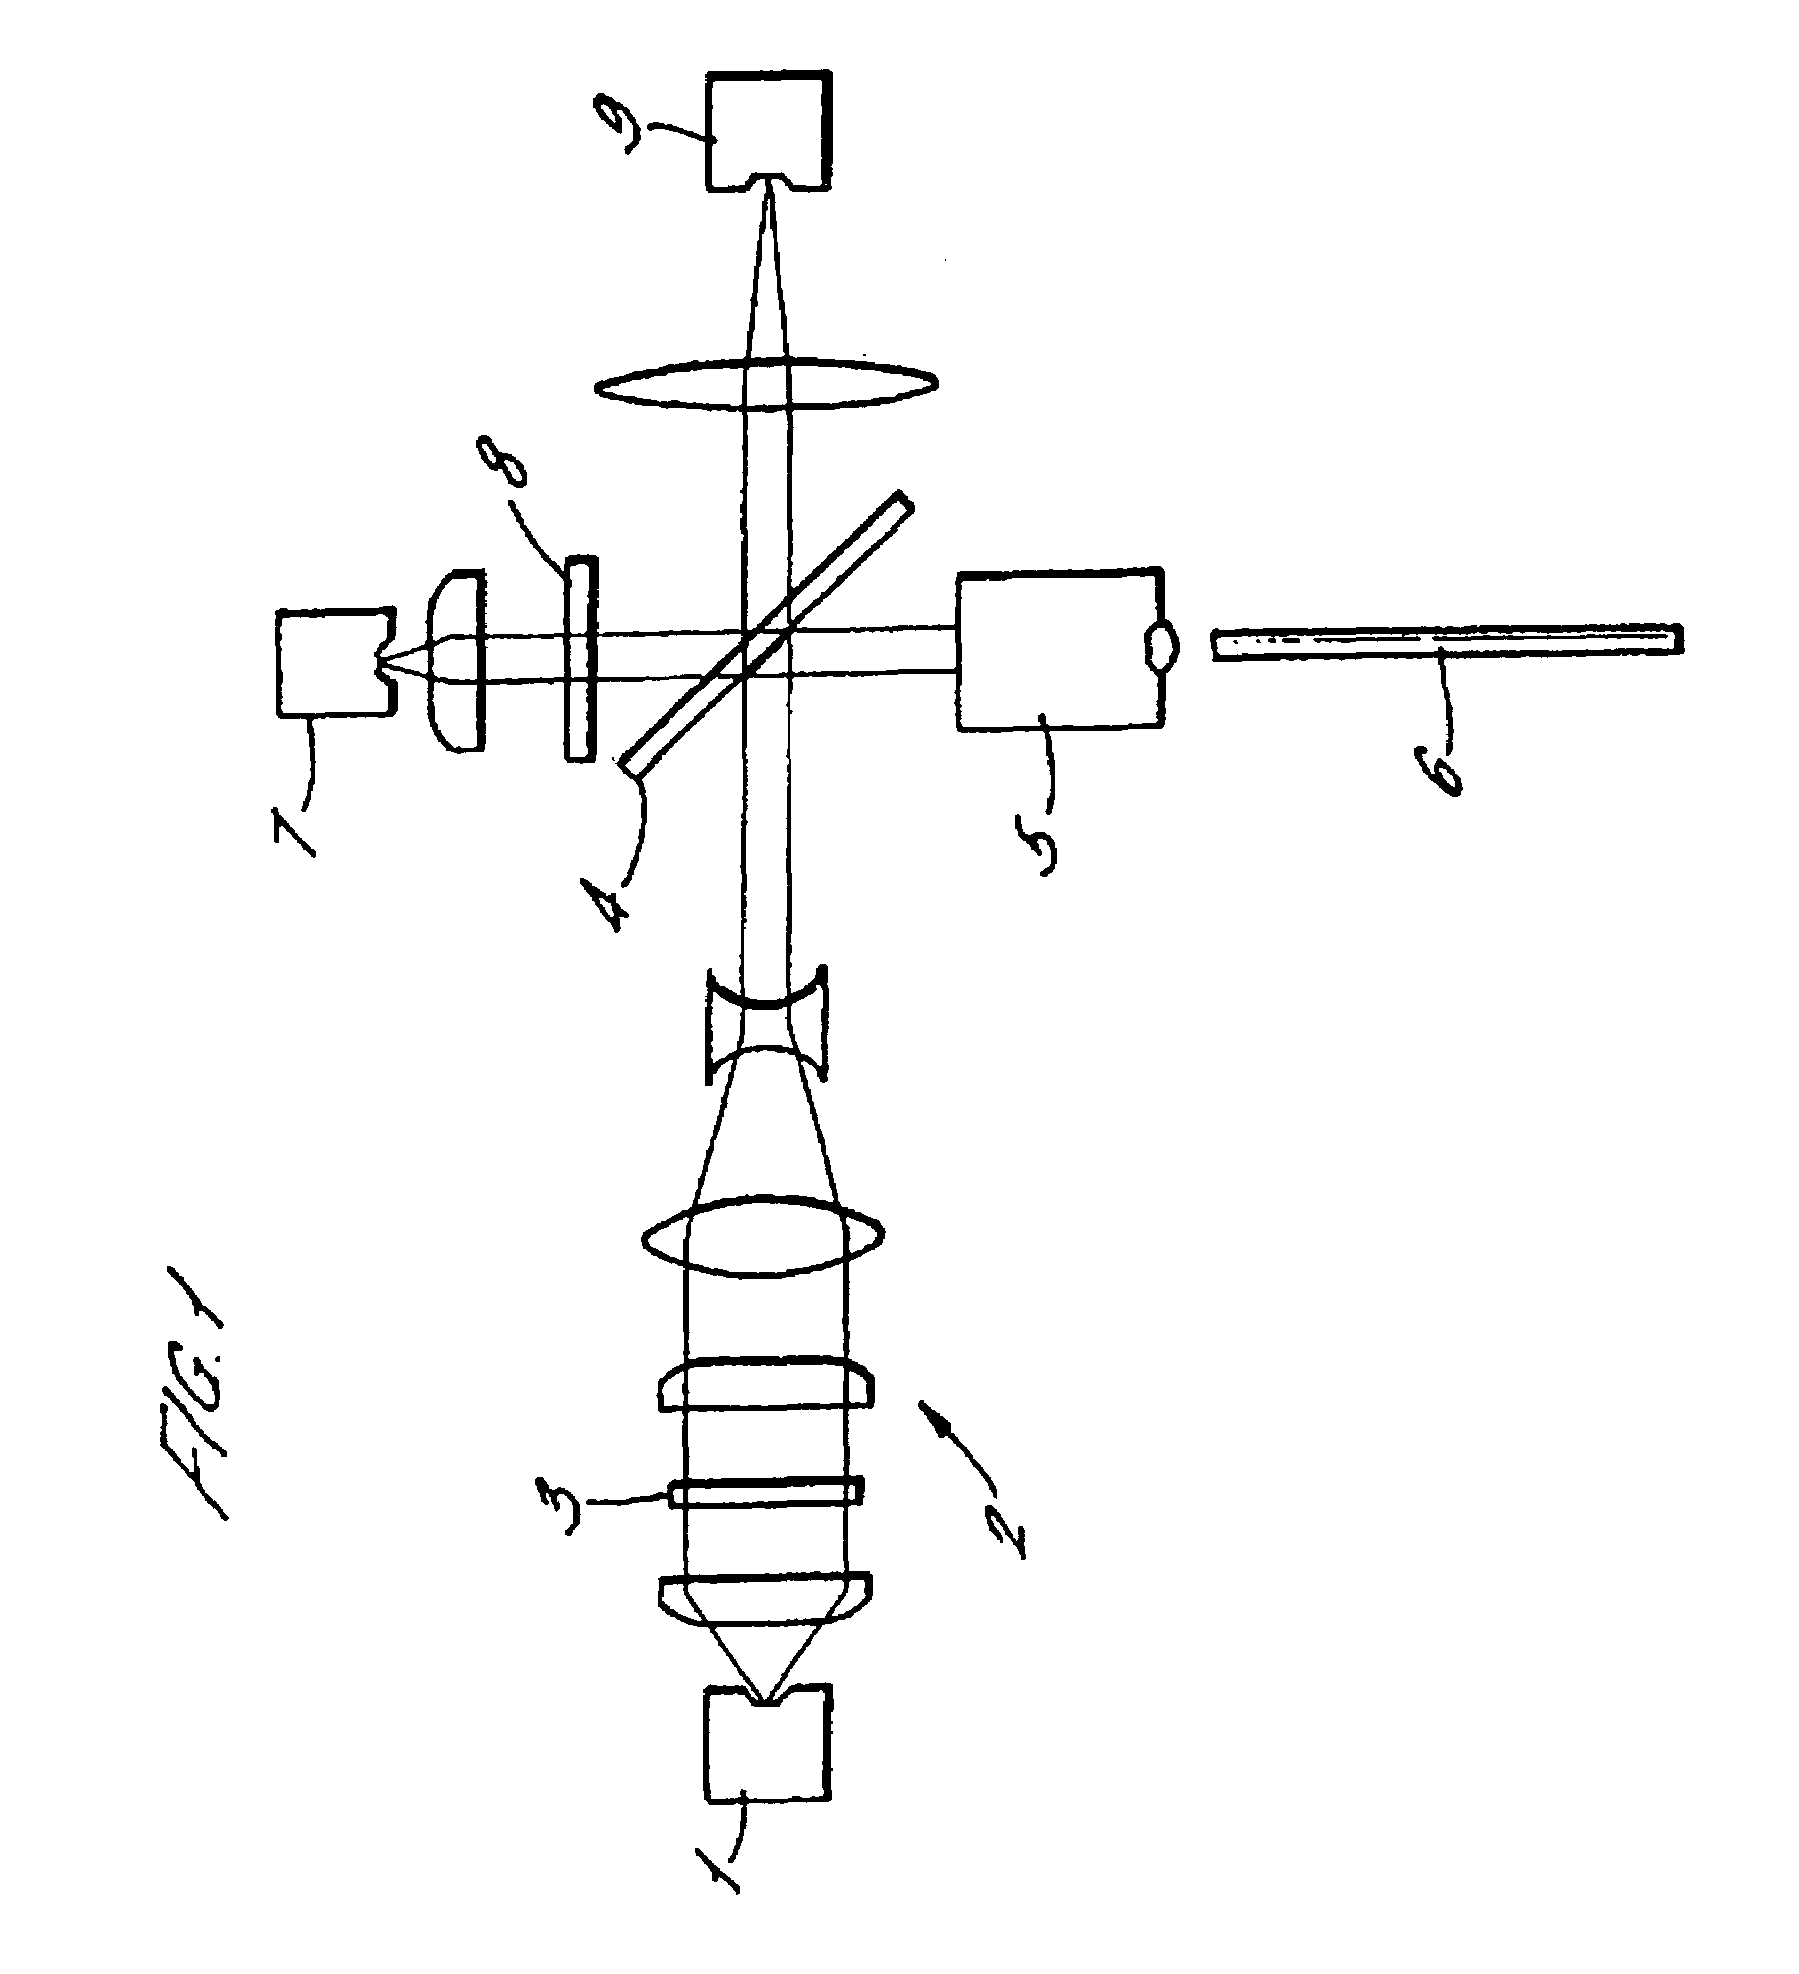 Optical sensor containing particles for in situ measurement of analytes